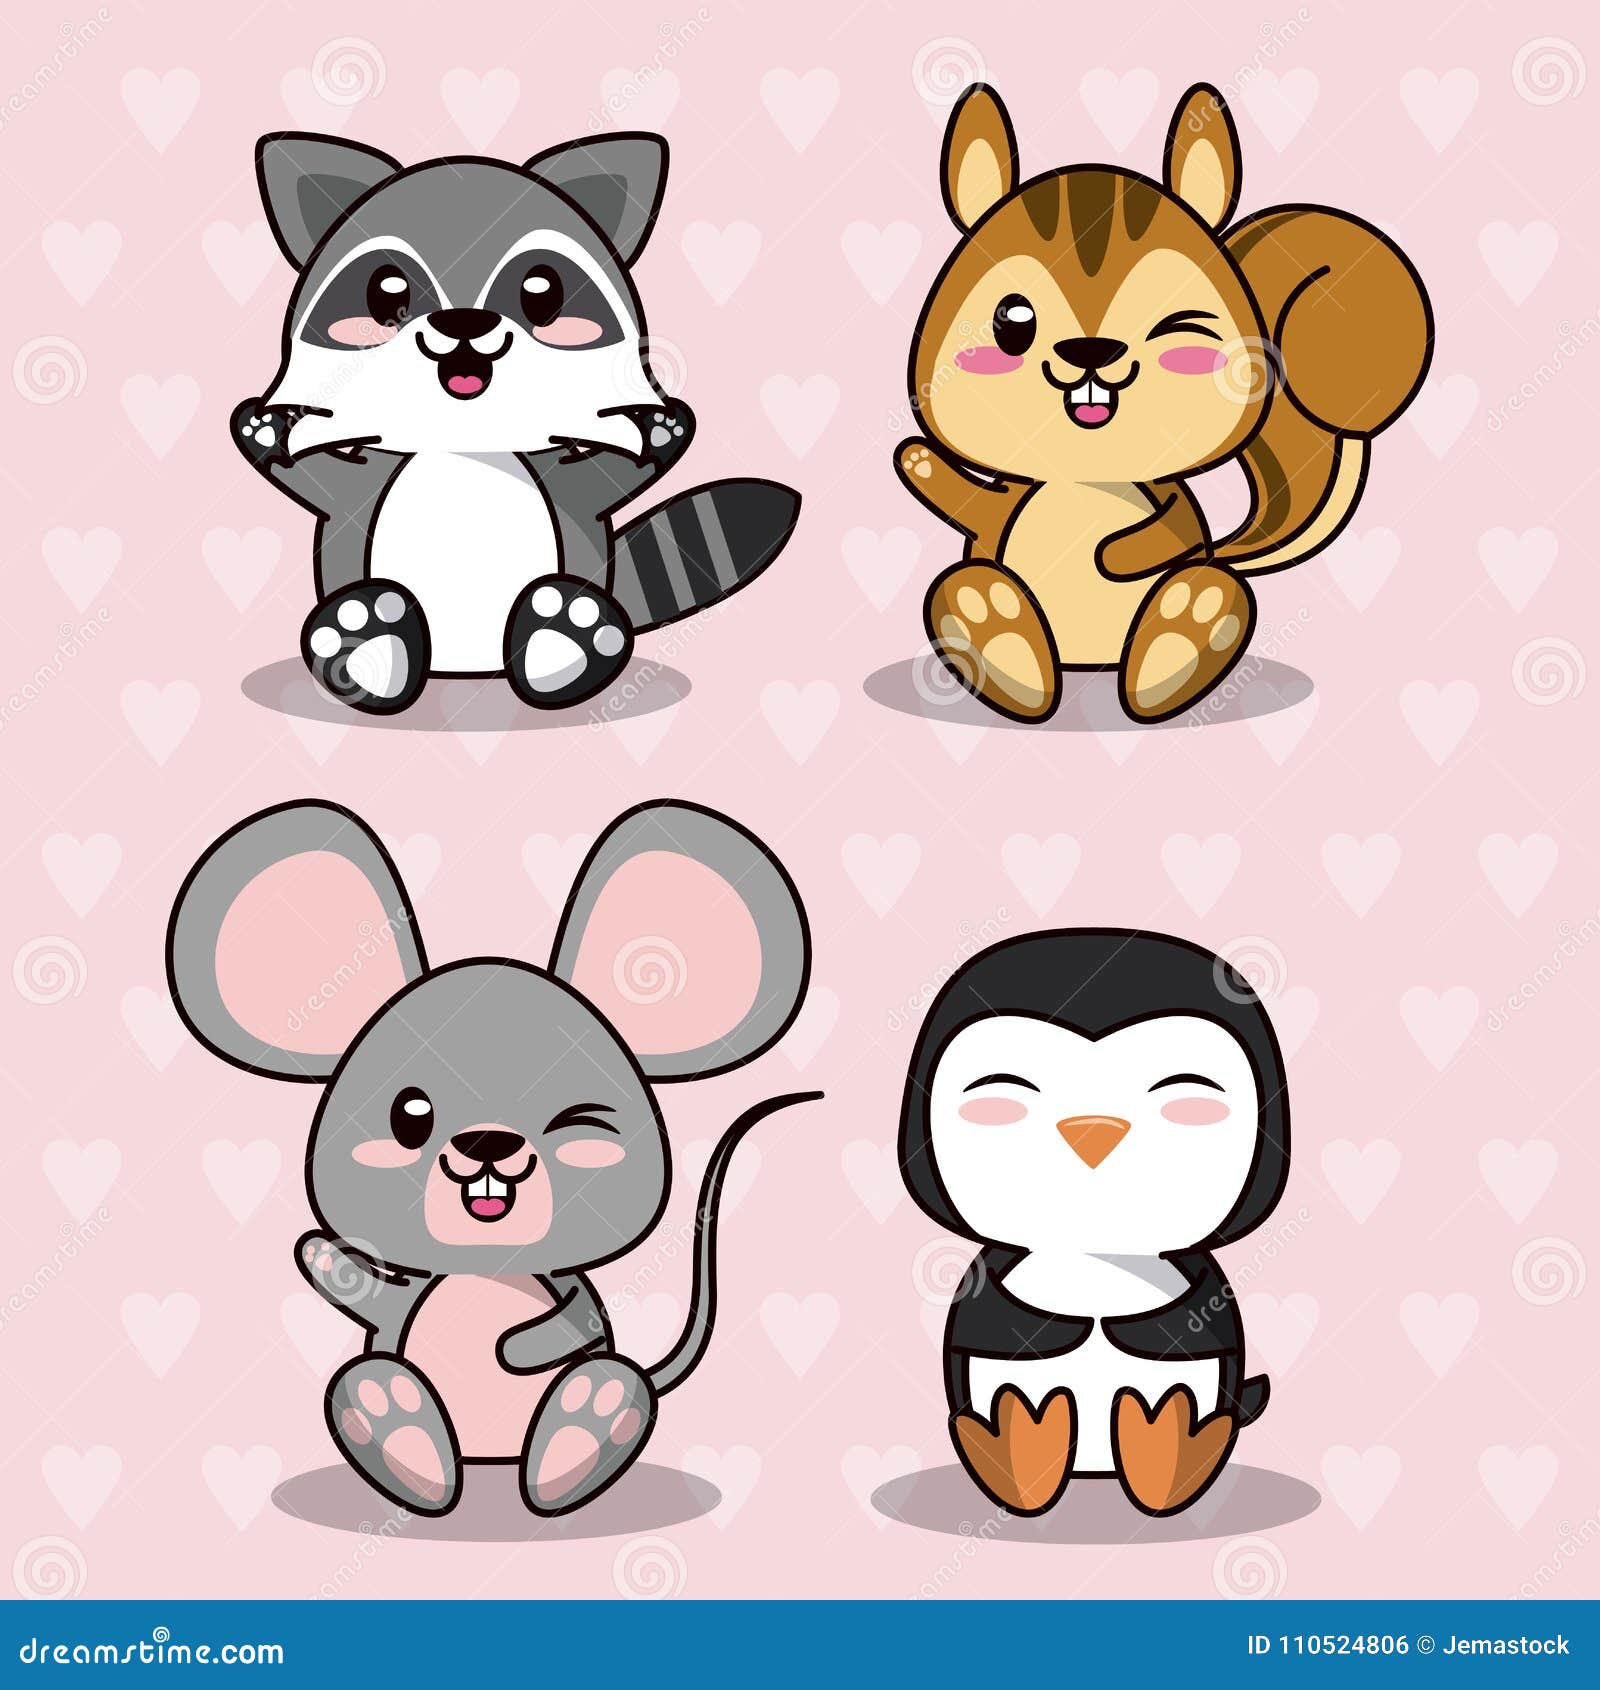 Kawaii Anime Animals Cute Kitten Bunny App Lock APK for Android Download